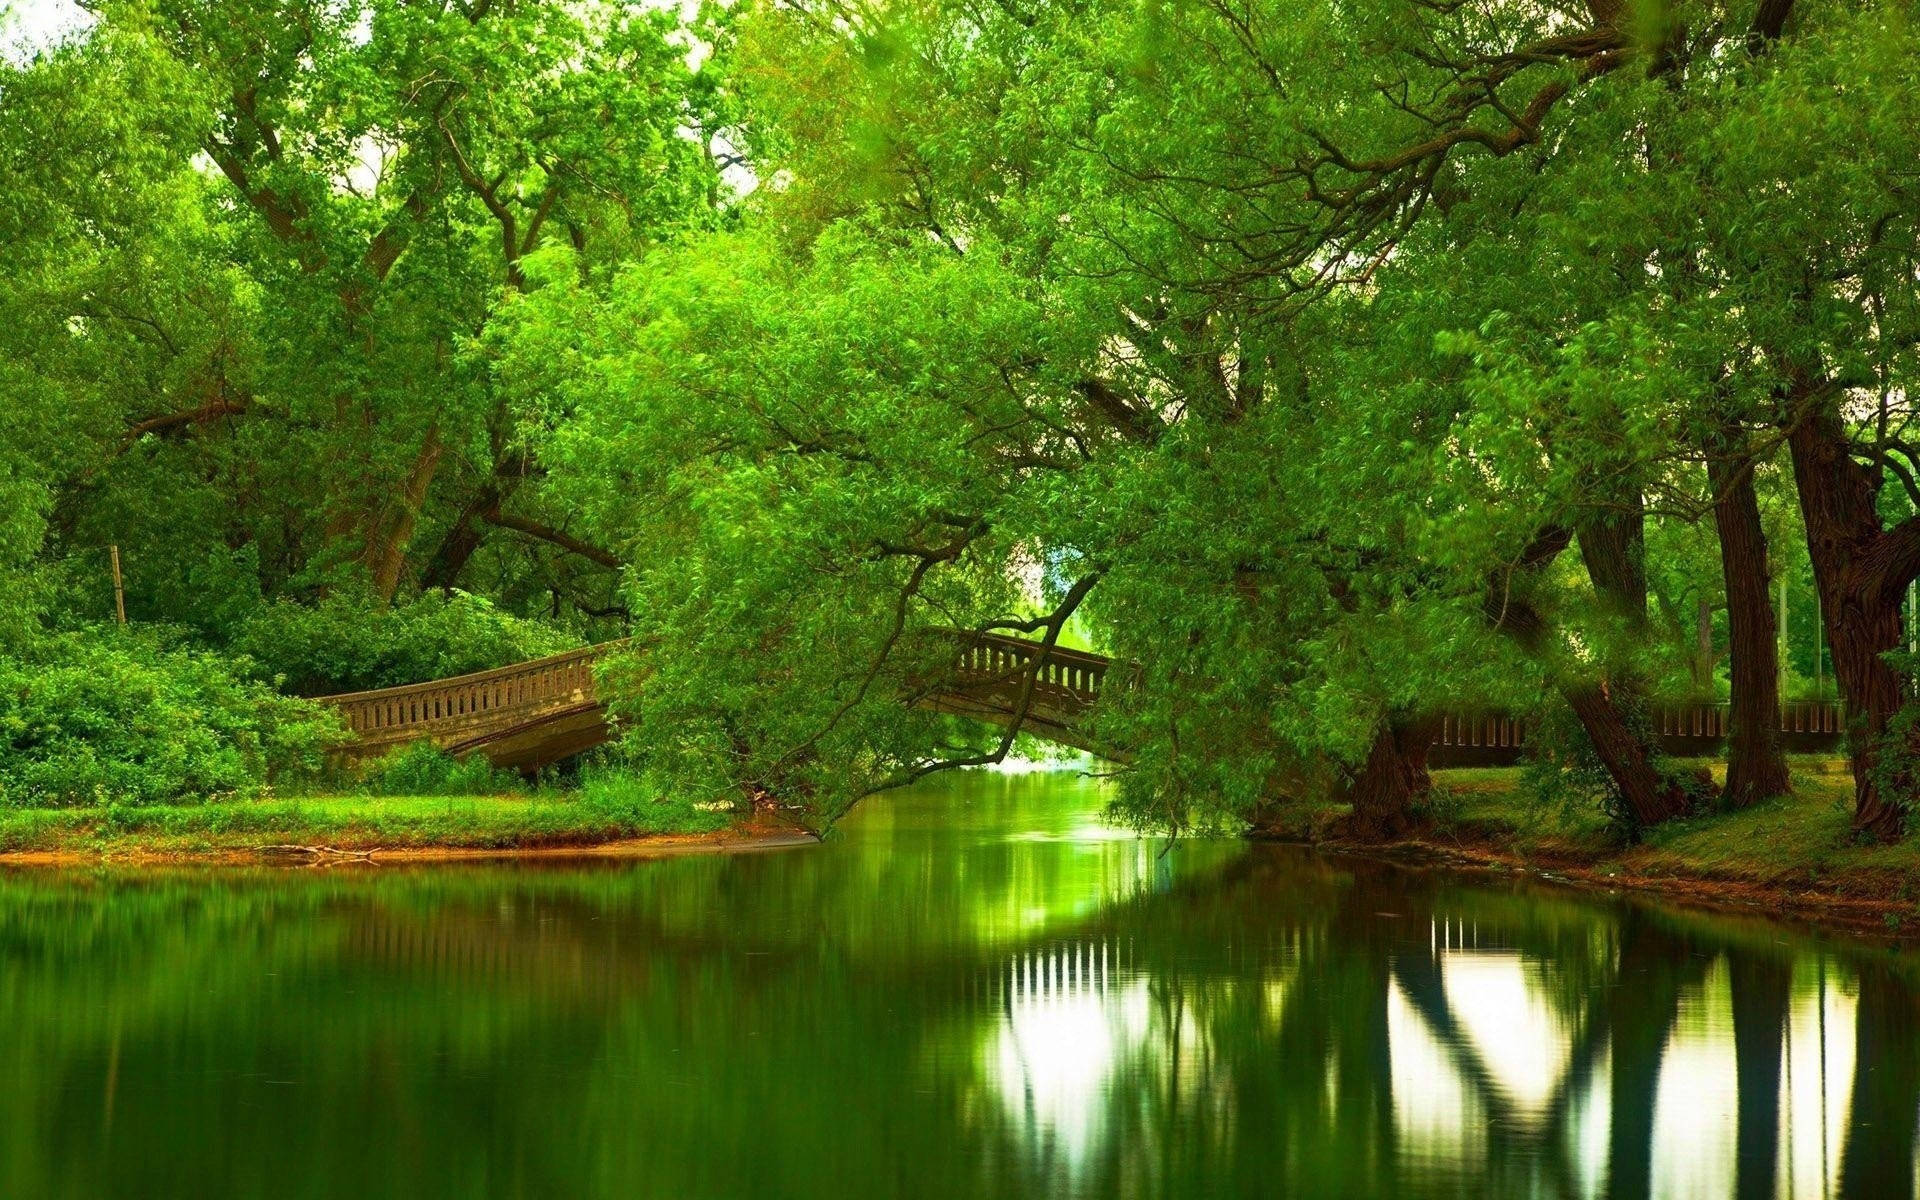 Free Green Tree Wallpaper Downloads, [100+] Green Tree Wallpapers for FREE  